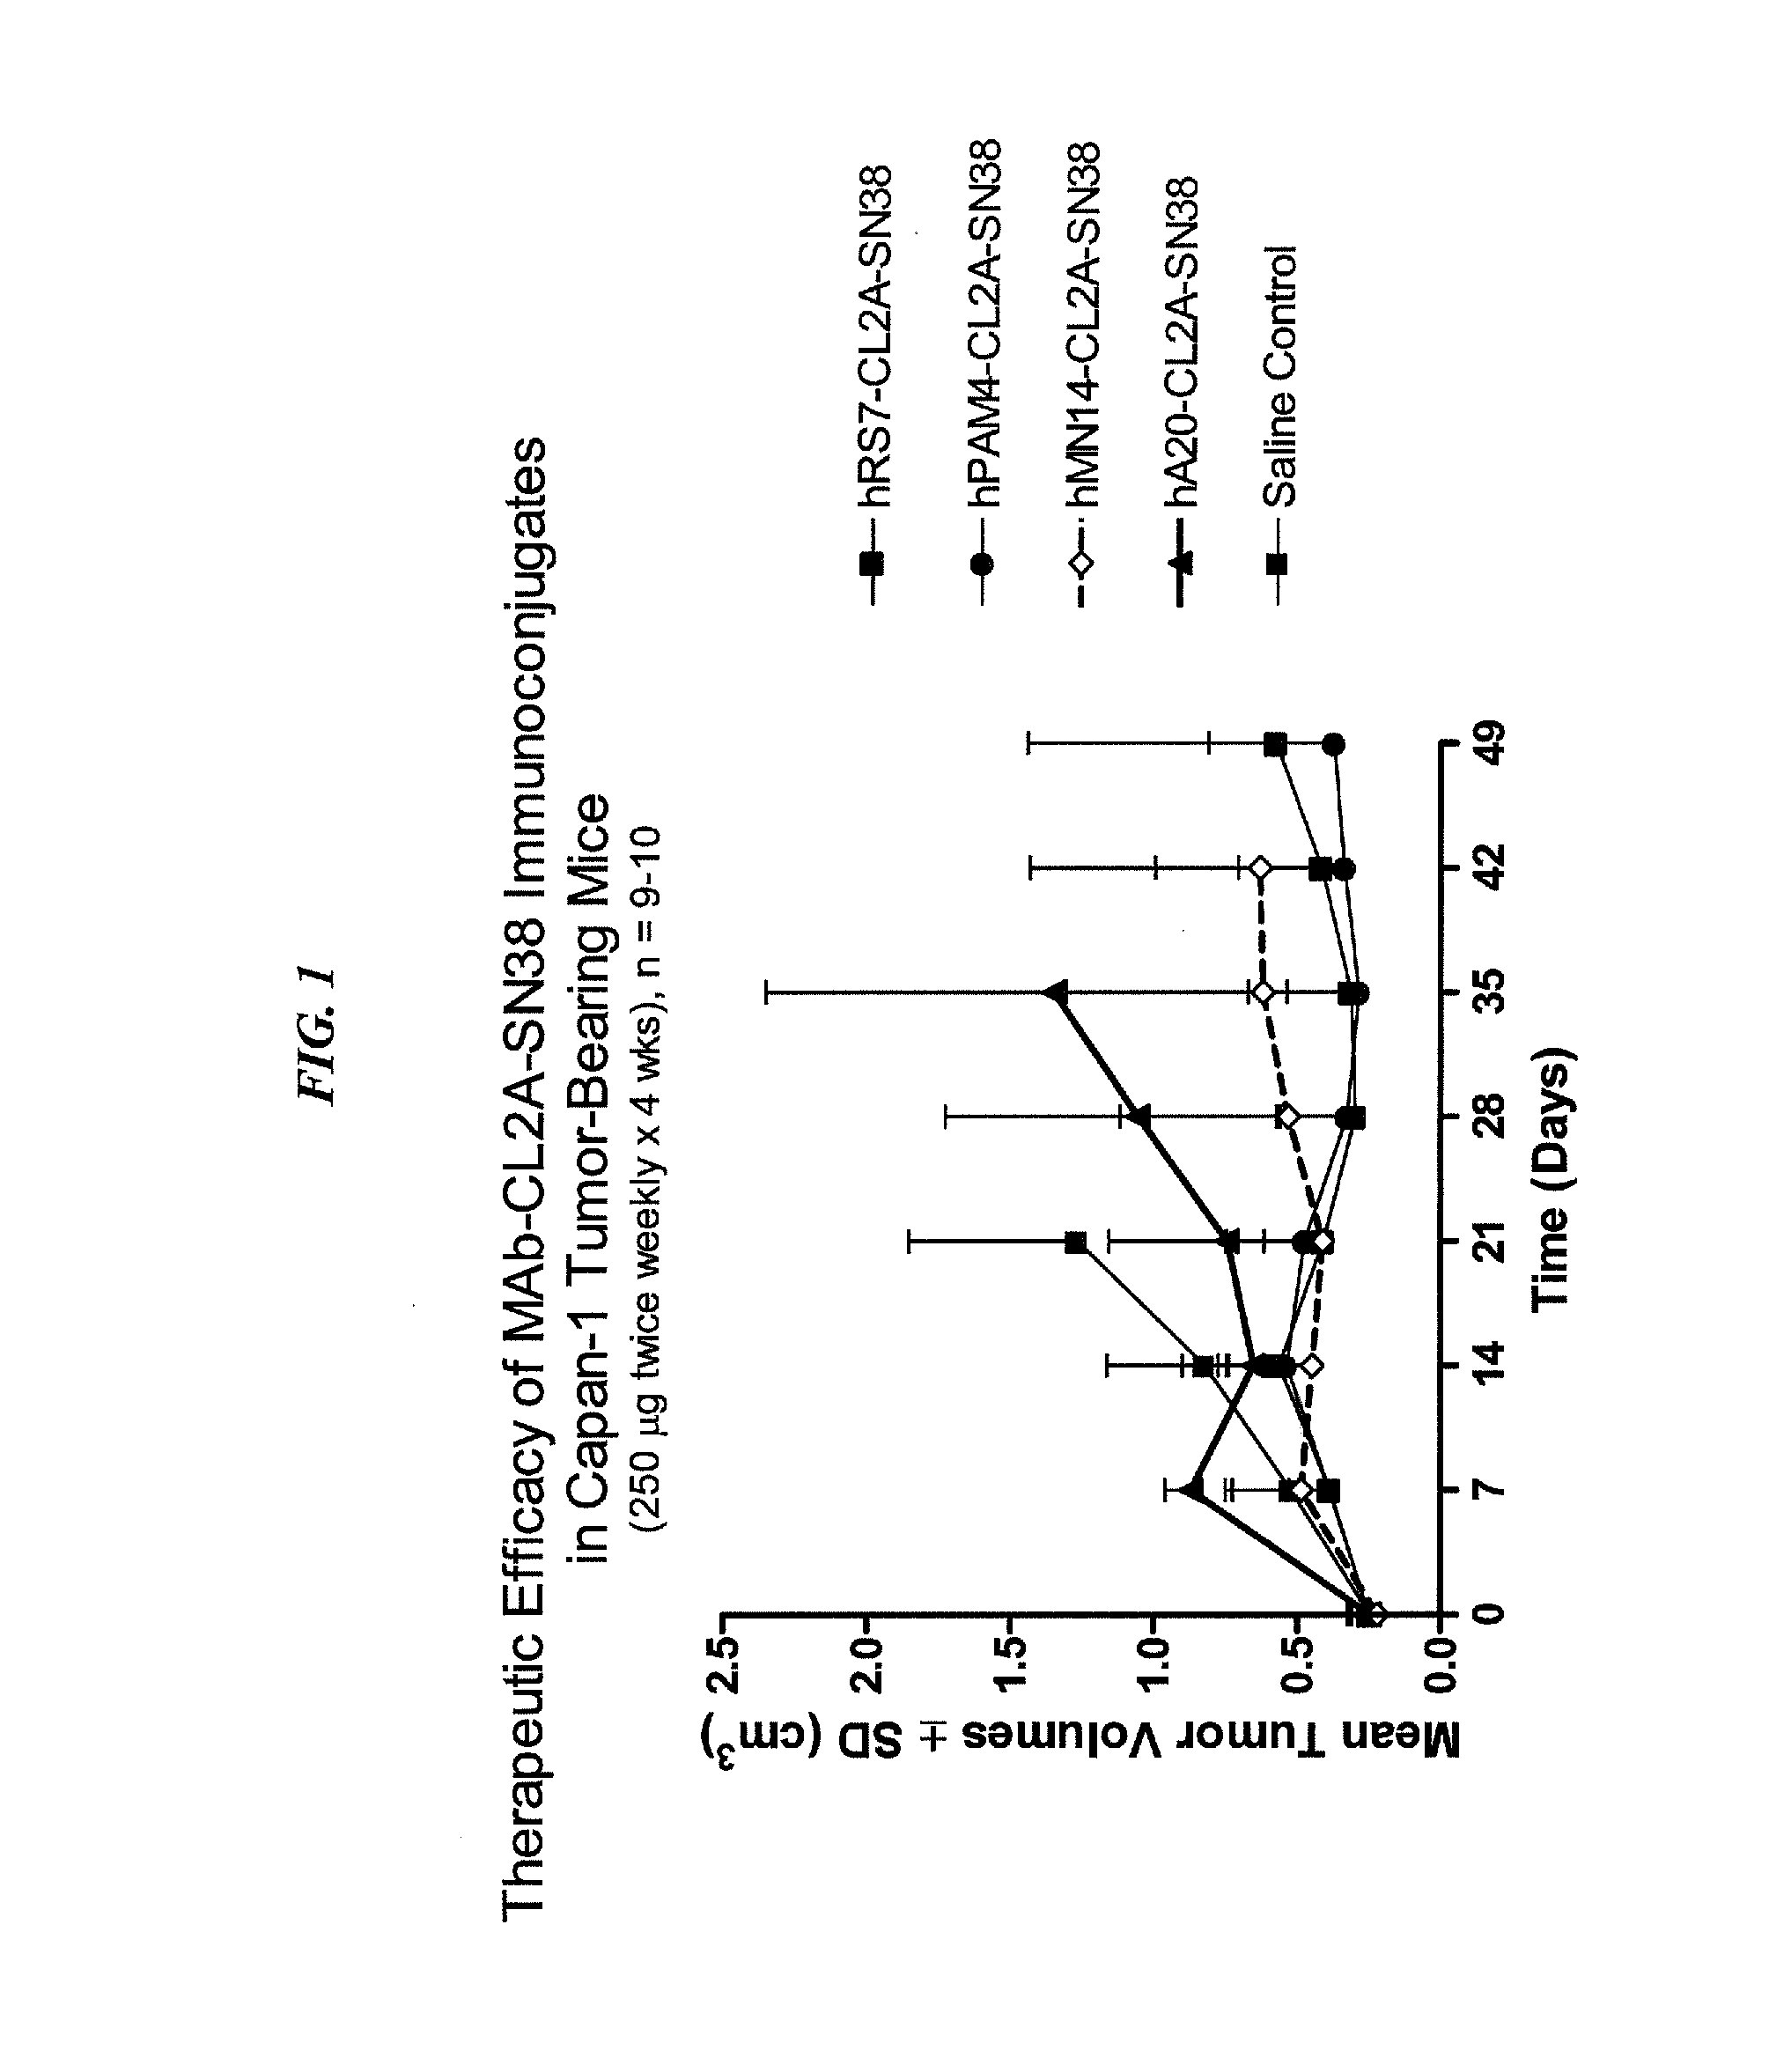 Dosages of Immunoconjugates of Antibodies and SN-38 for Improved Efficacy and Decreased Toxicity